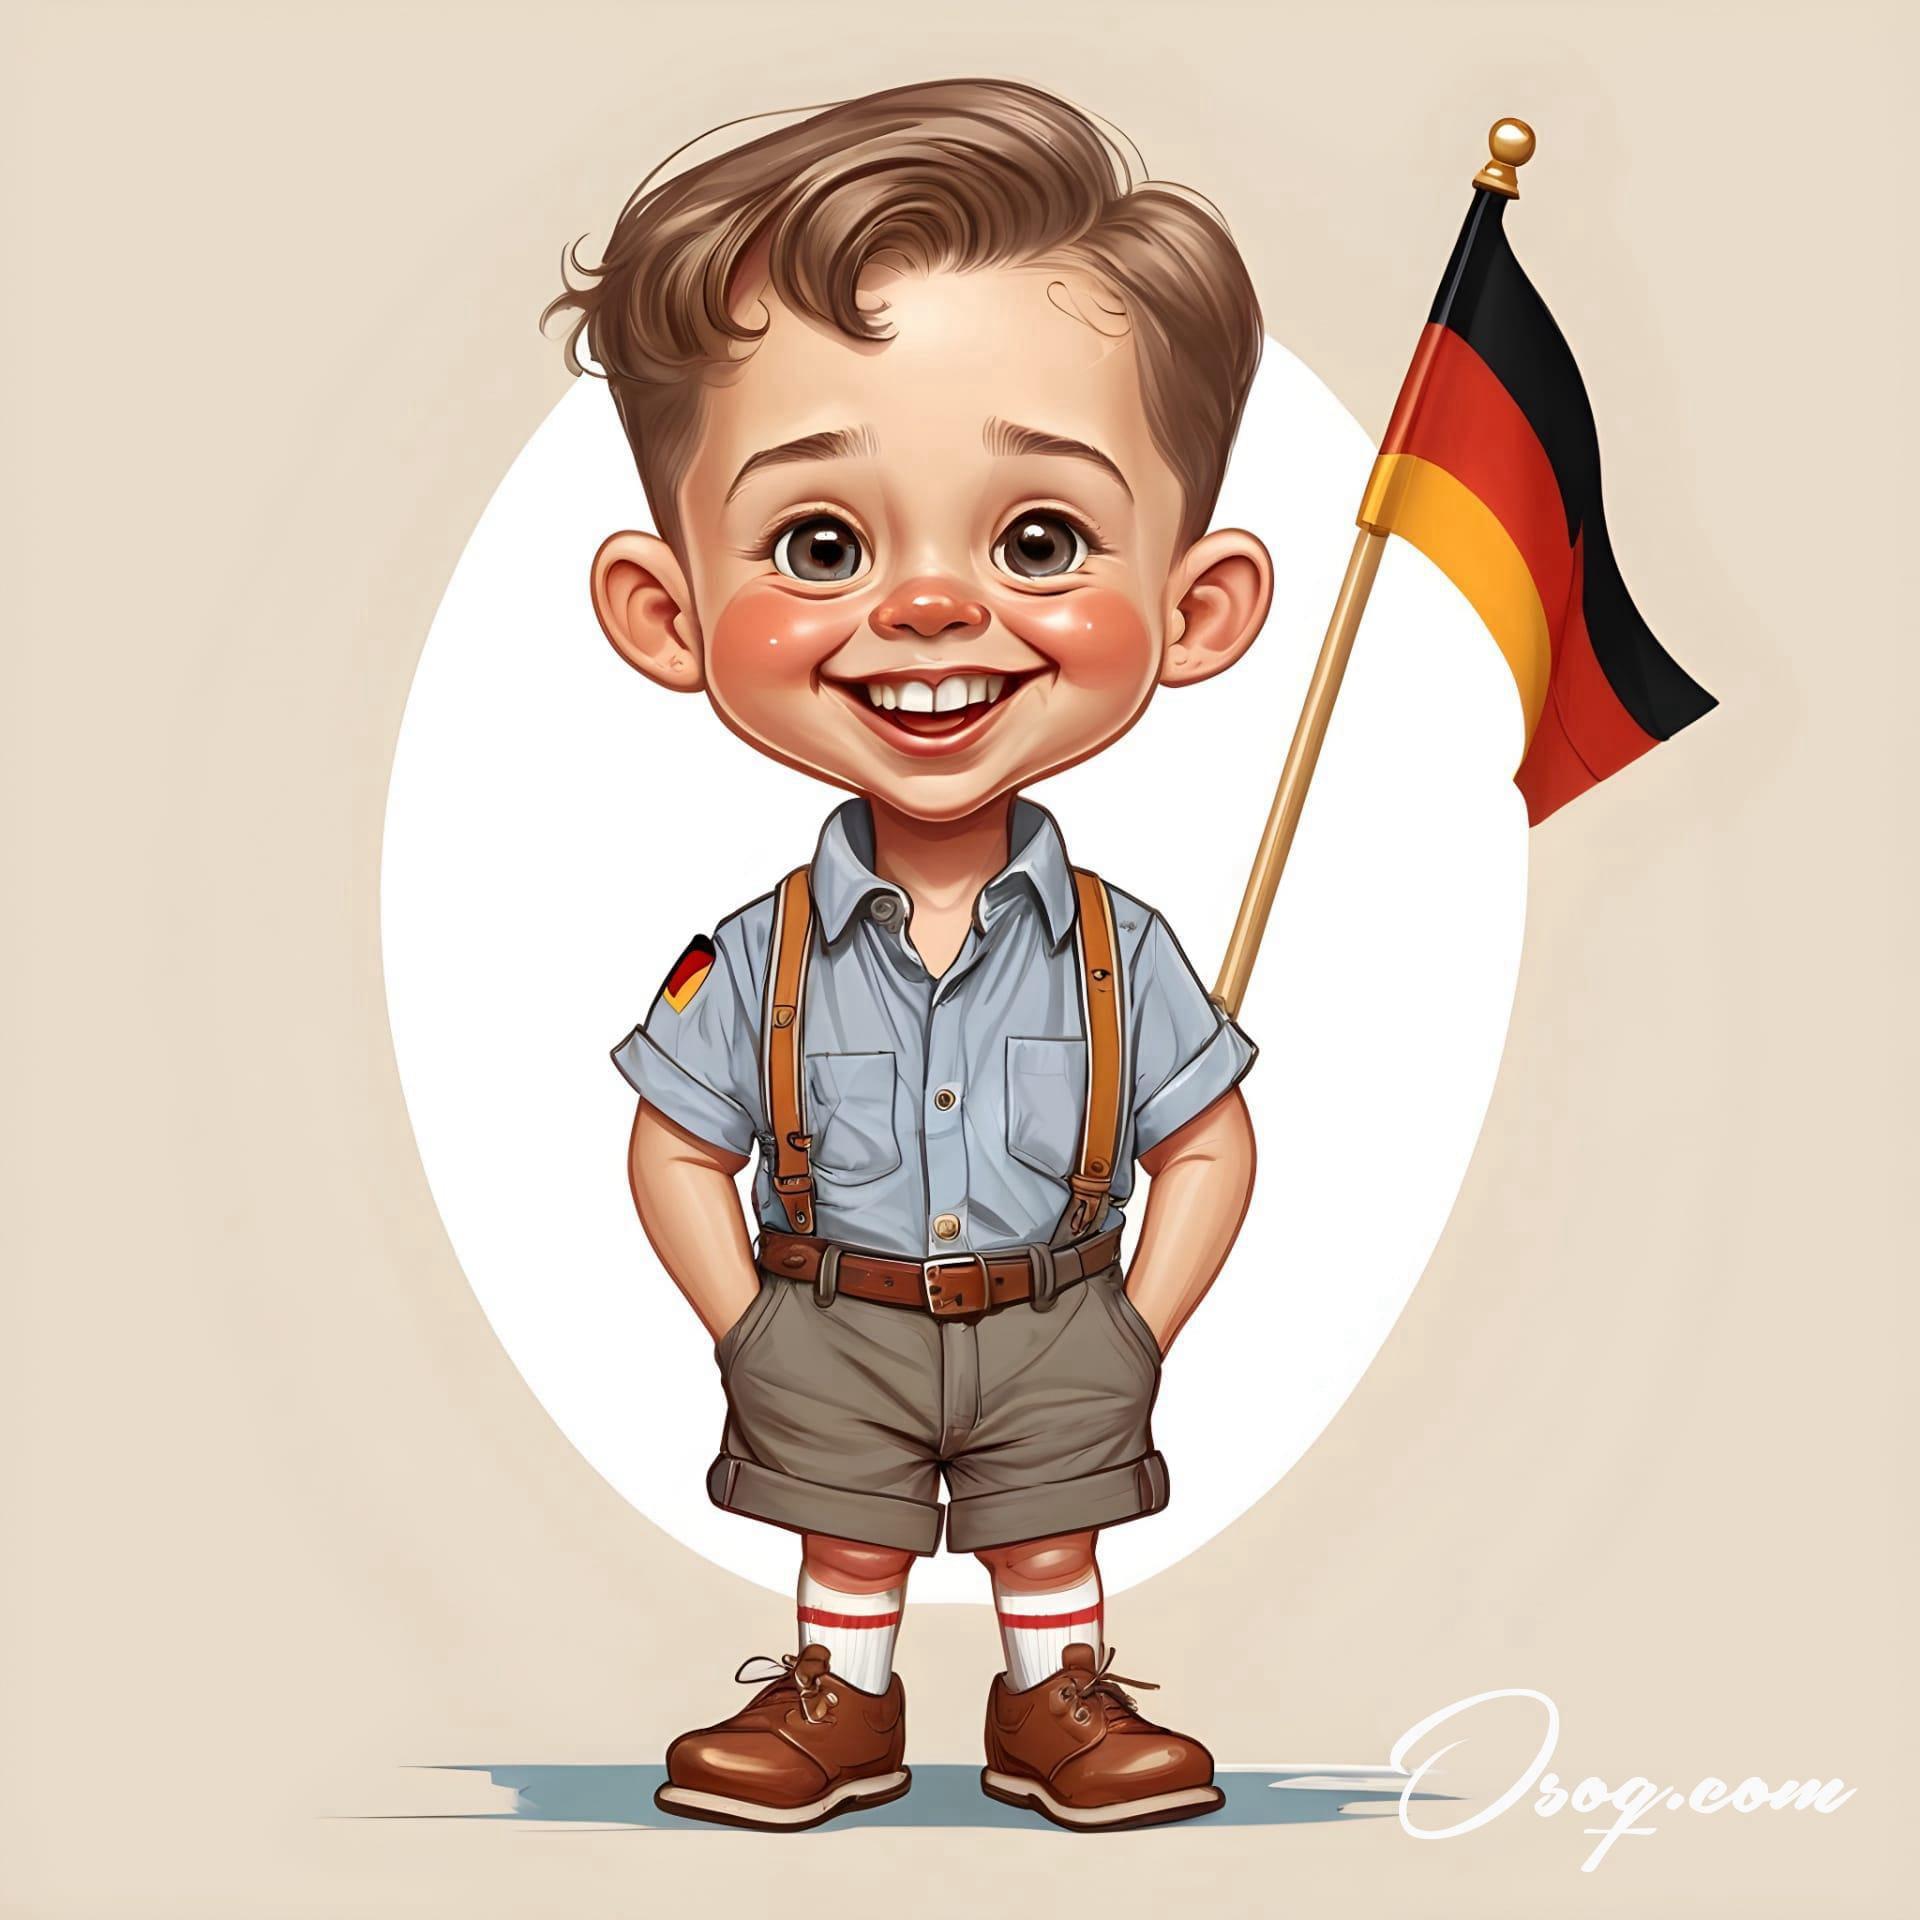 Germany caricature 03